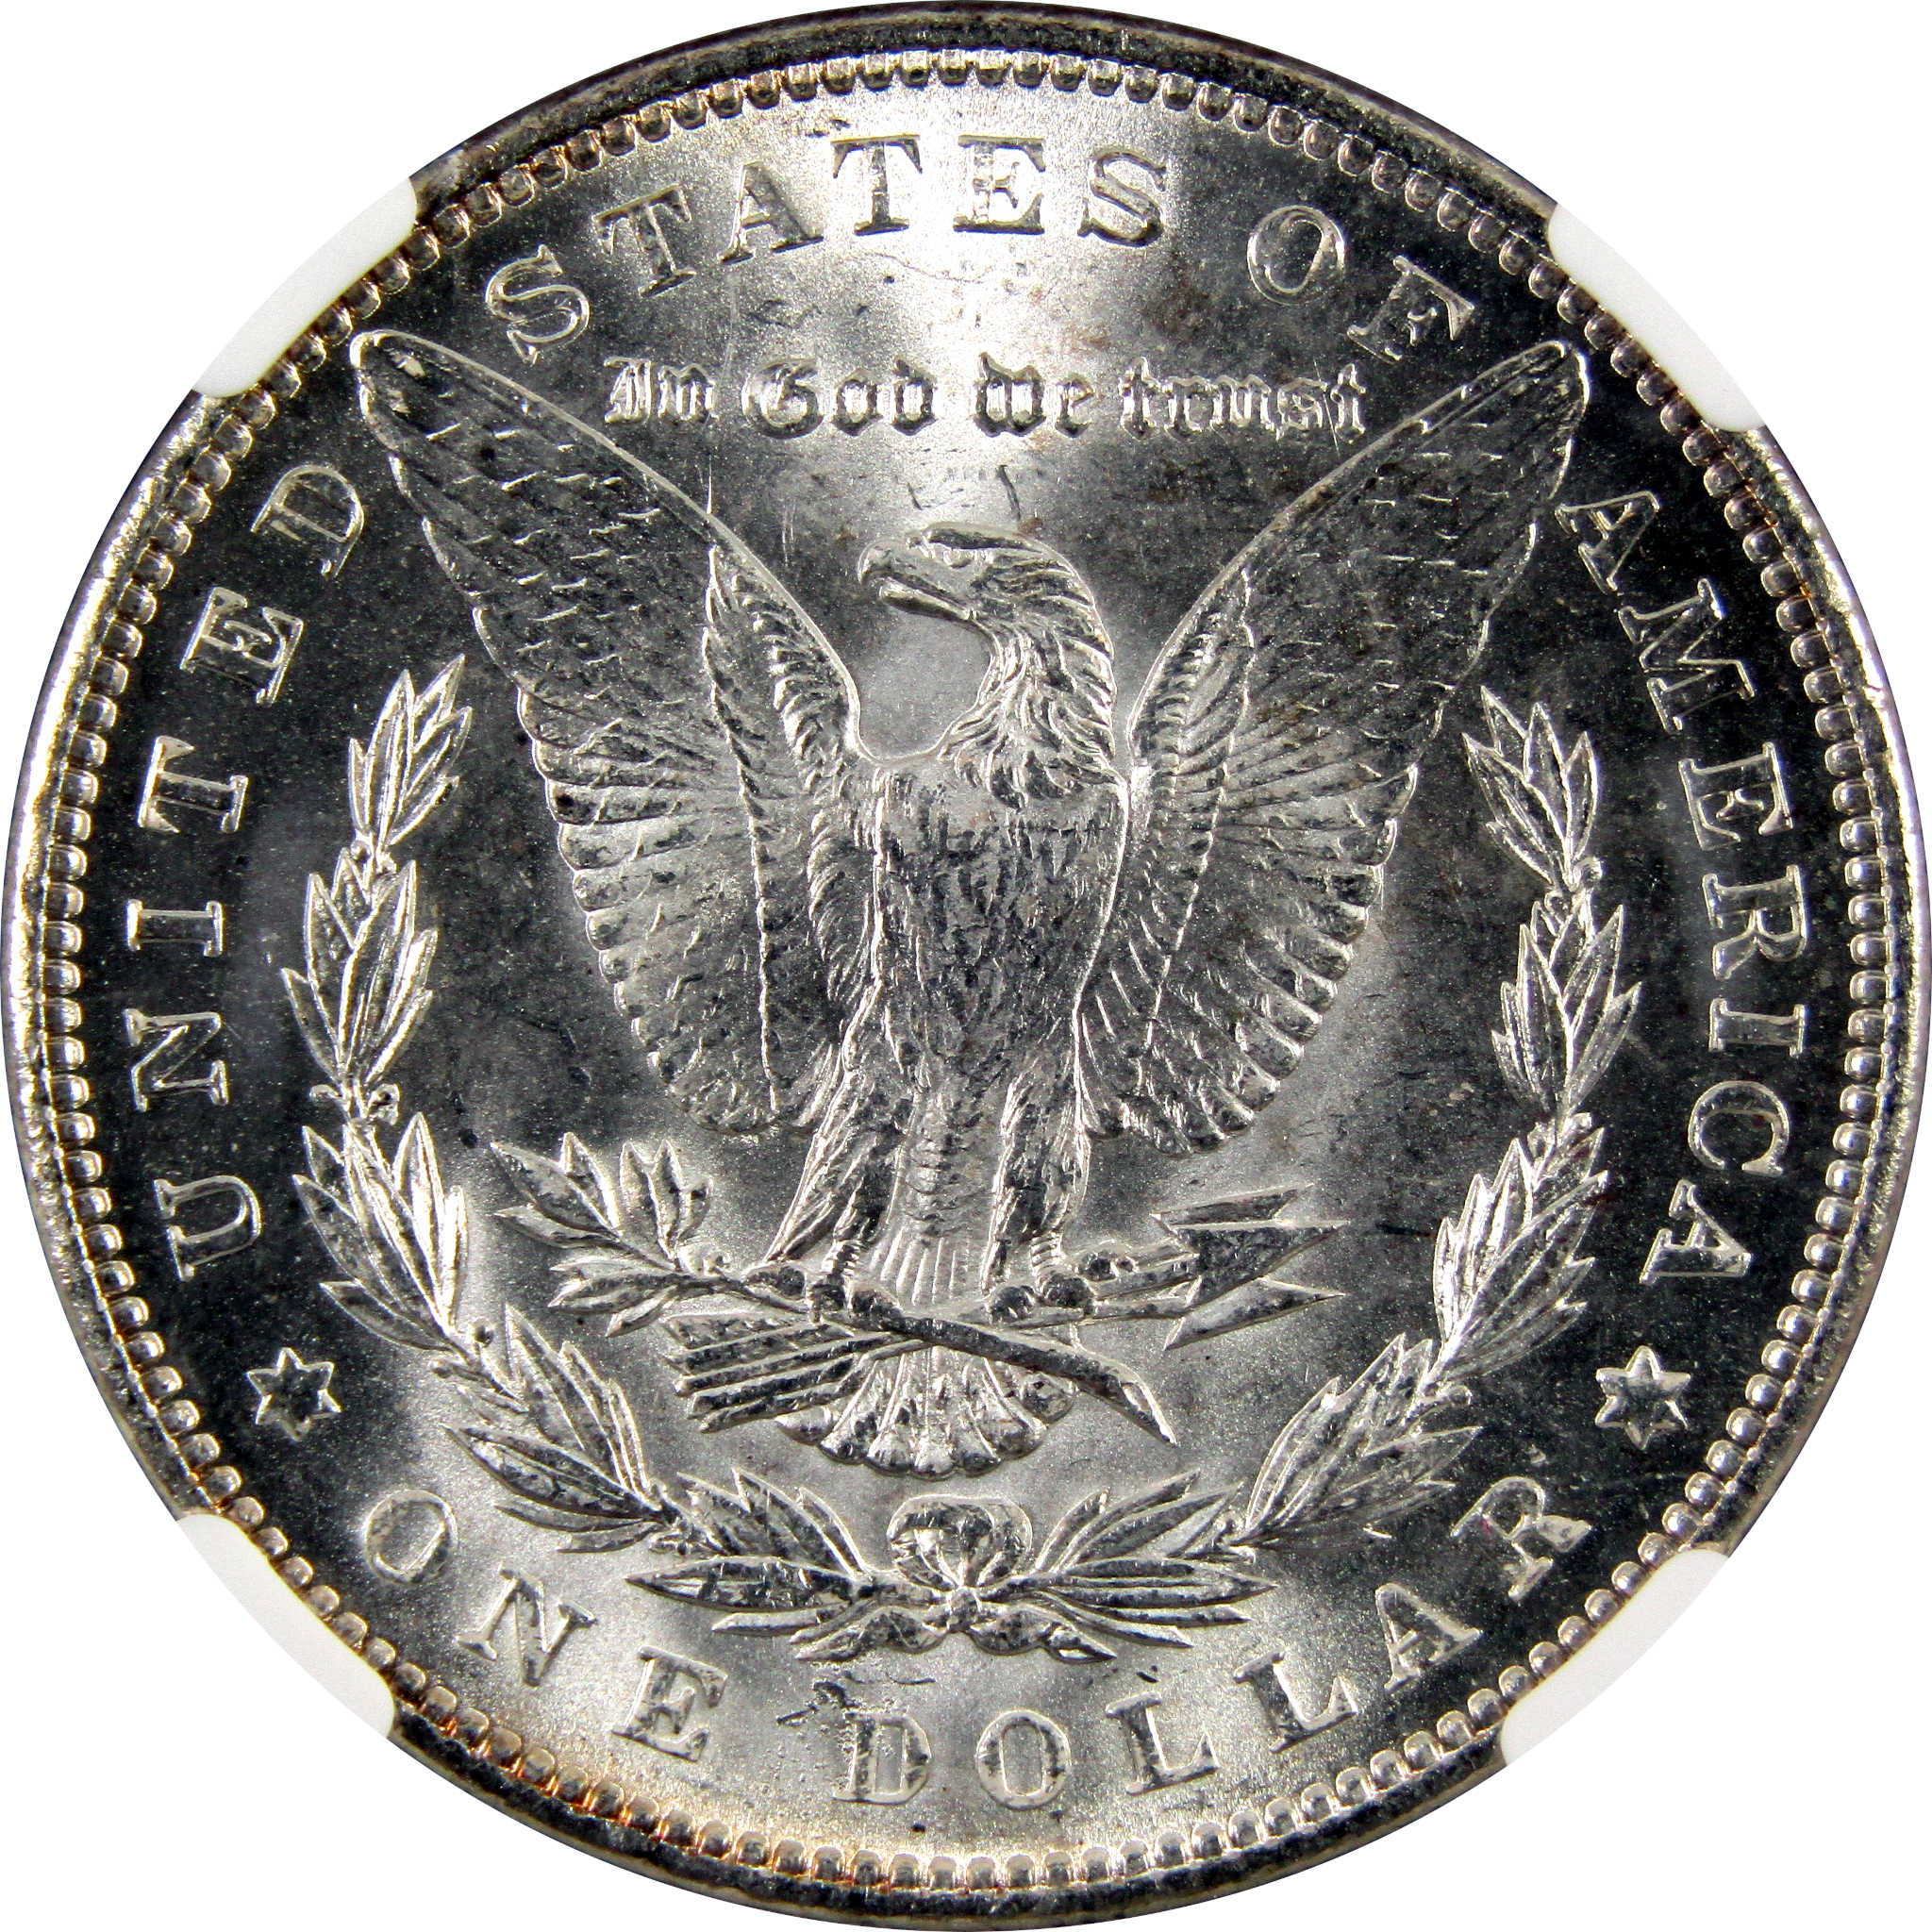 1889 Hitlist-40 VAM-5A Pitted Rev Morgan $1 MS63 NGC SKU:I11090 - Morgan coin - Morgan silver dollar - Morgan silver dollar for sale - Profile Coins &amp; Collectibles